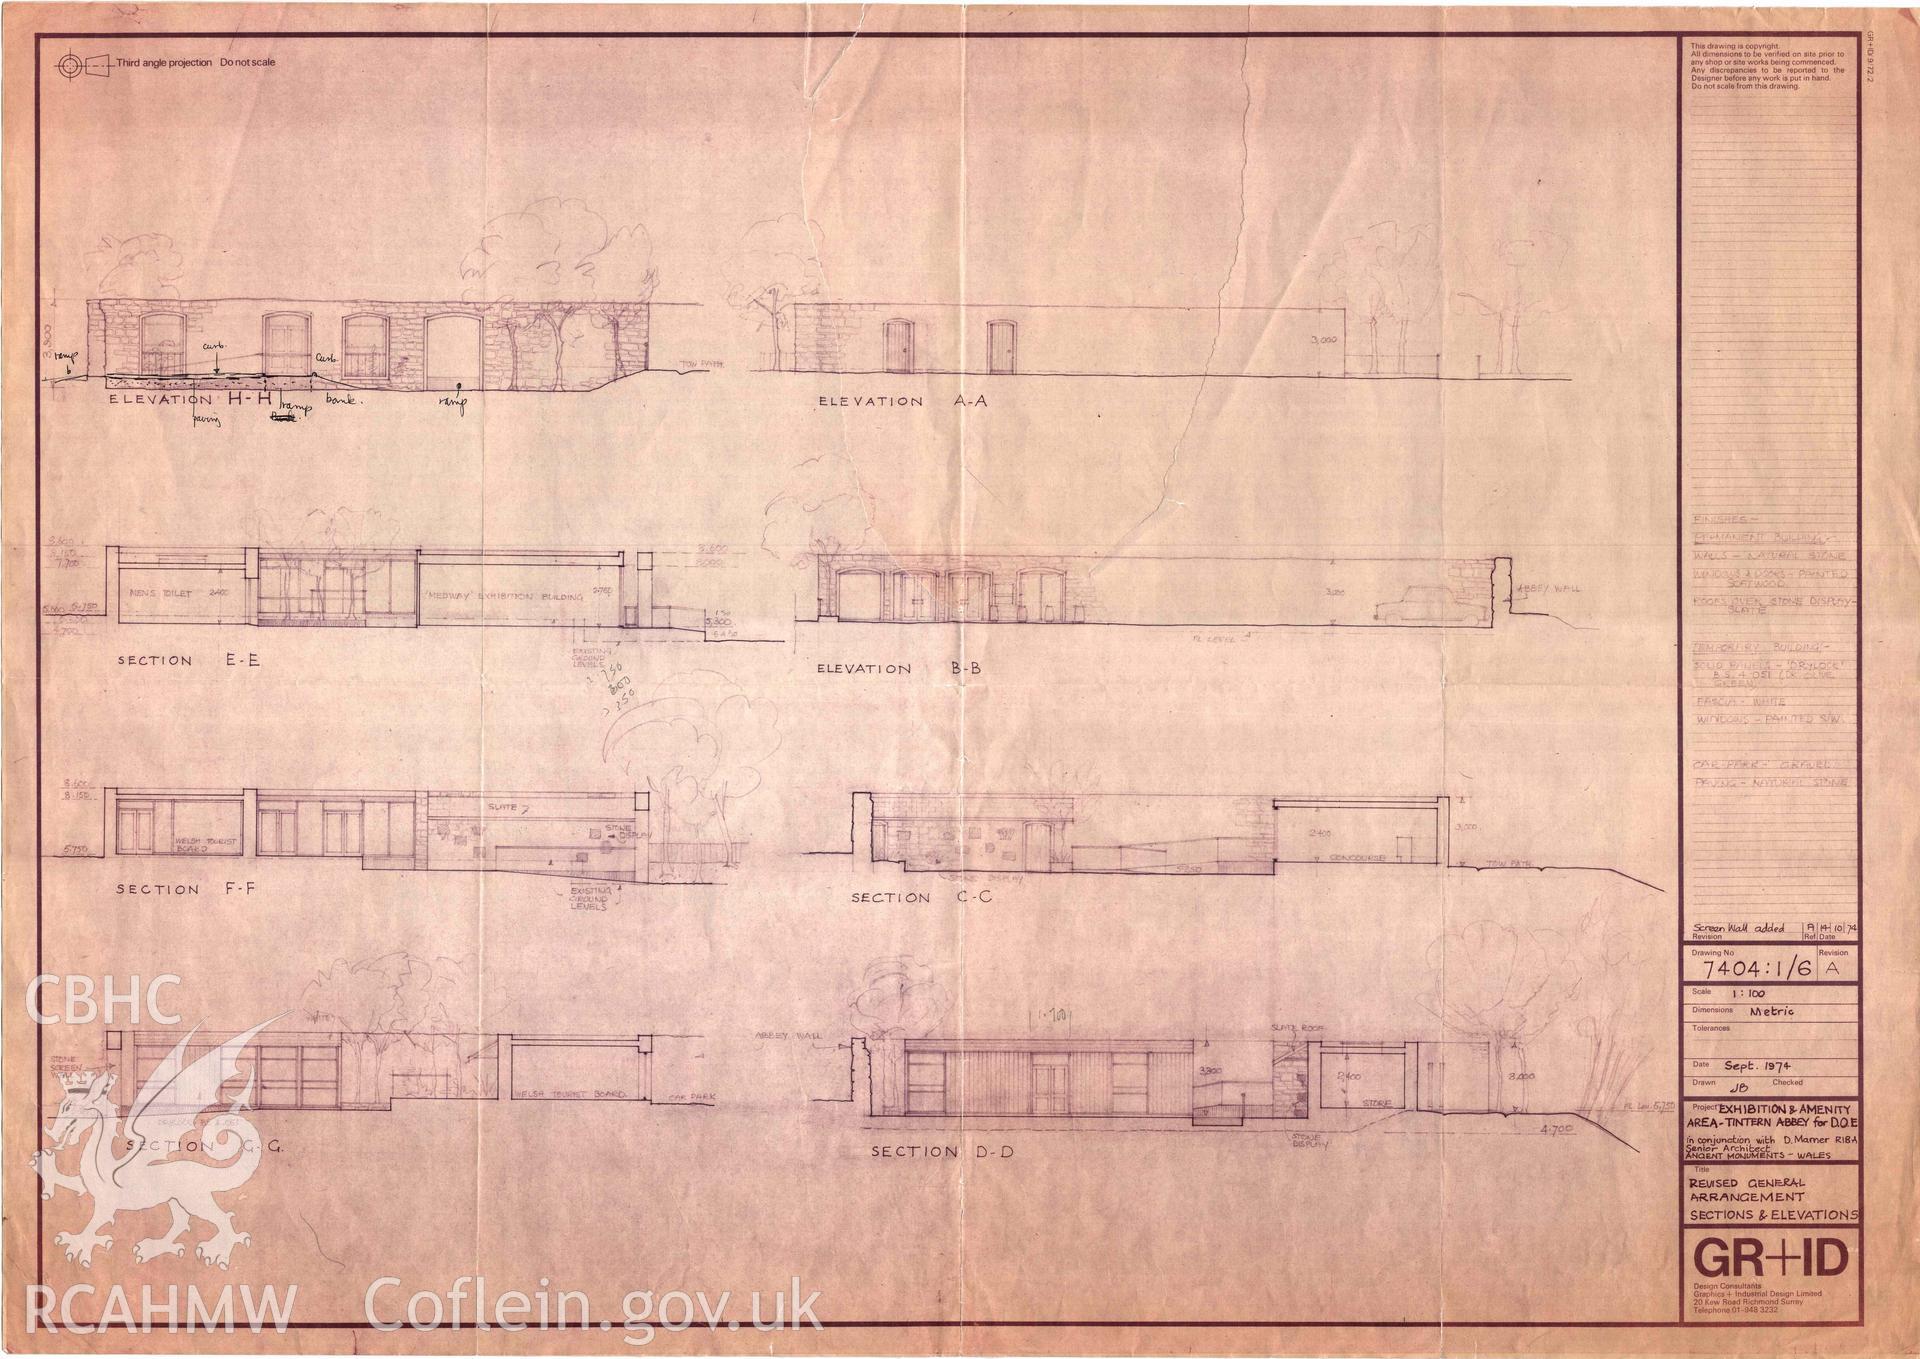 Cadw guardianship monument drawing, exhibition and amenity area, revised general arrangement, sections and elevations, Tintern Abbey.  Dated 14th October 1974.